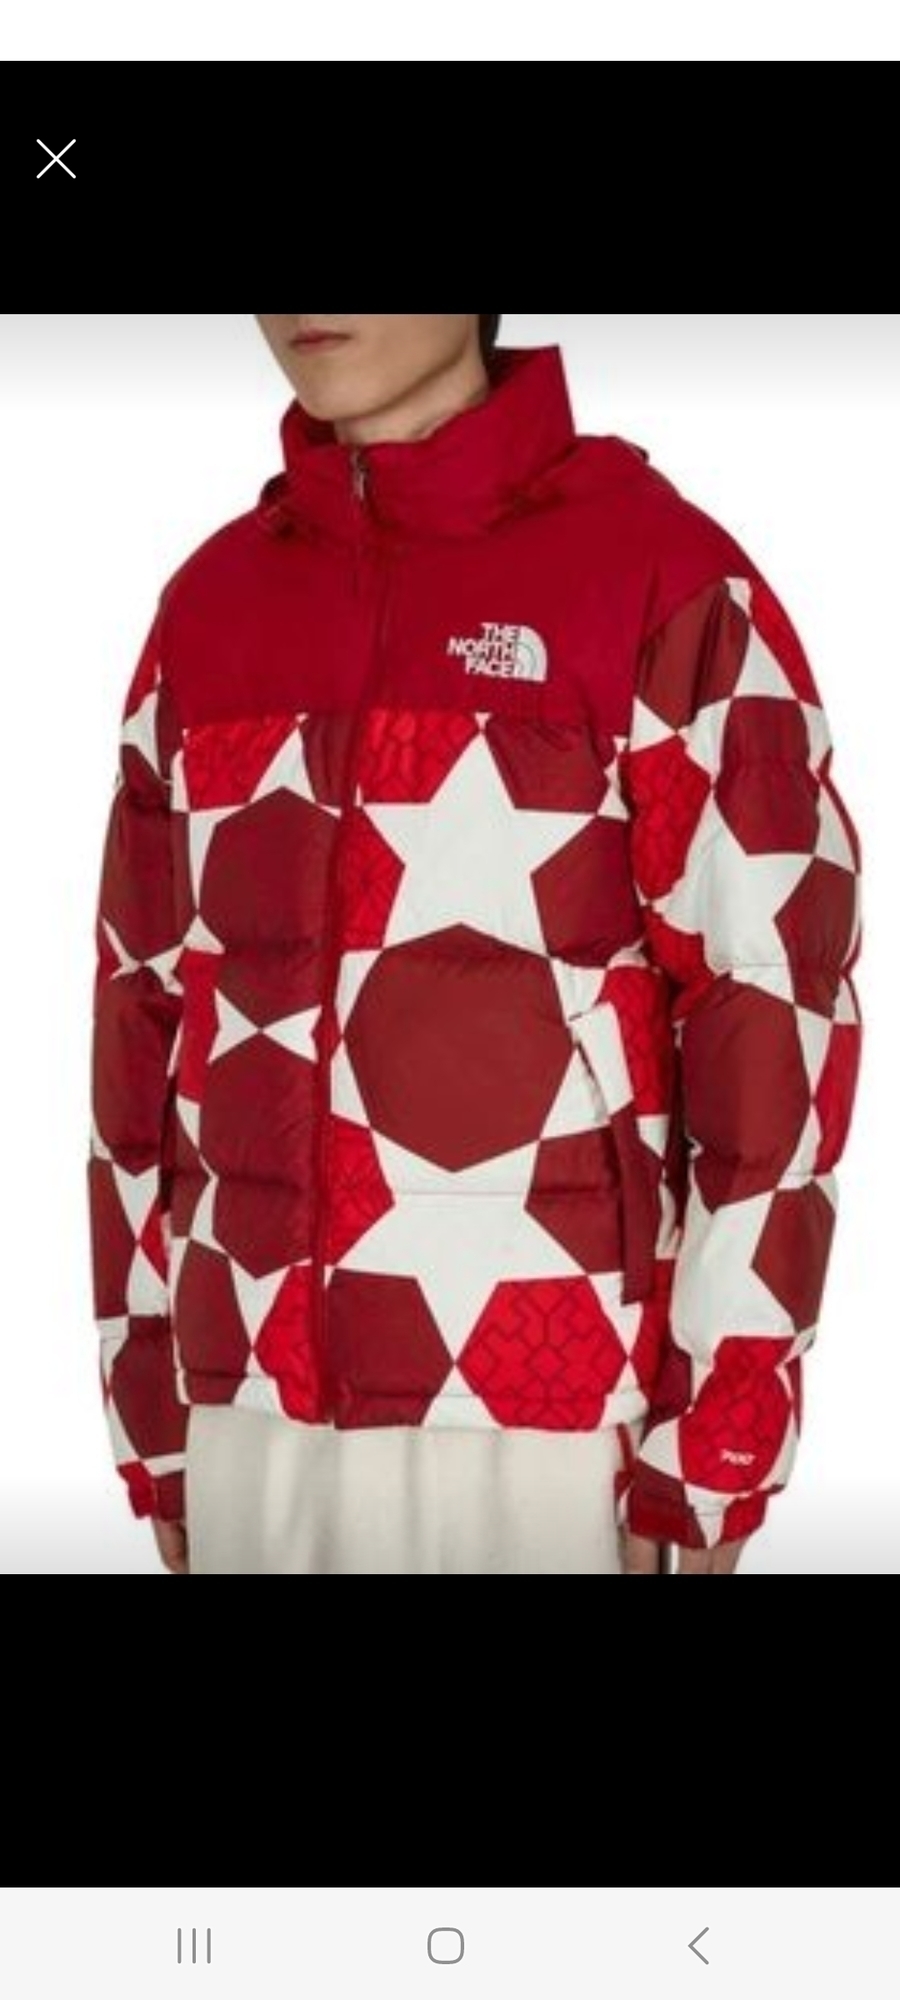 North face 1996 retro print red jacket size M 2